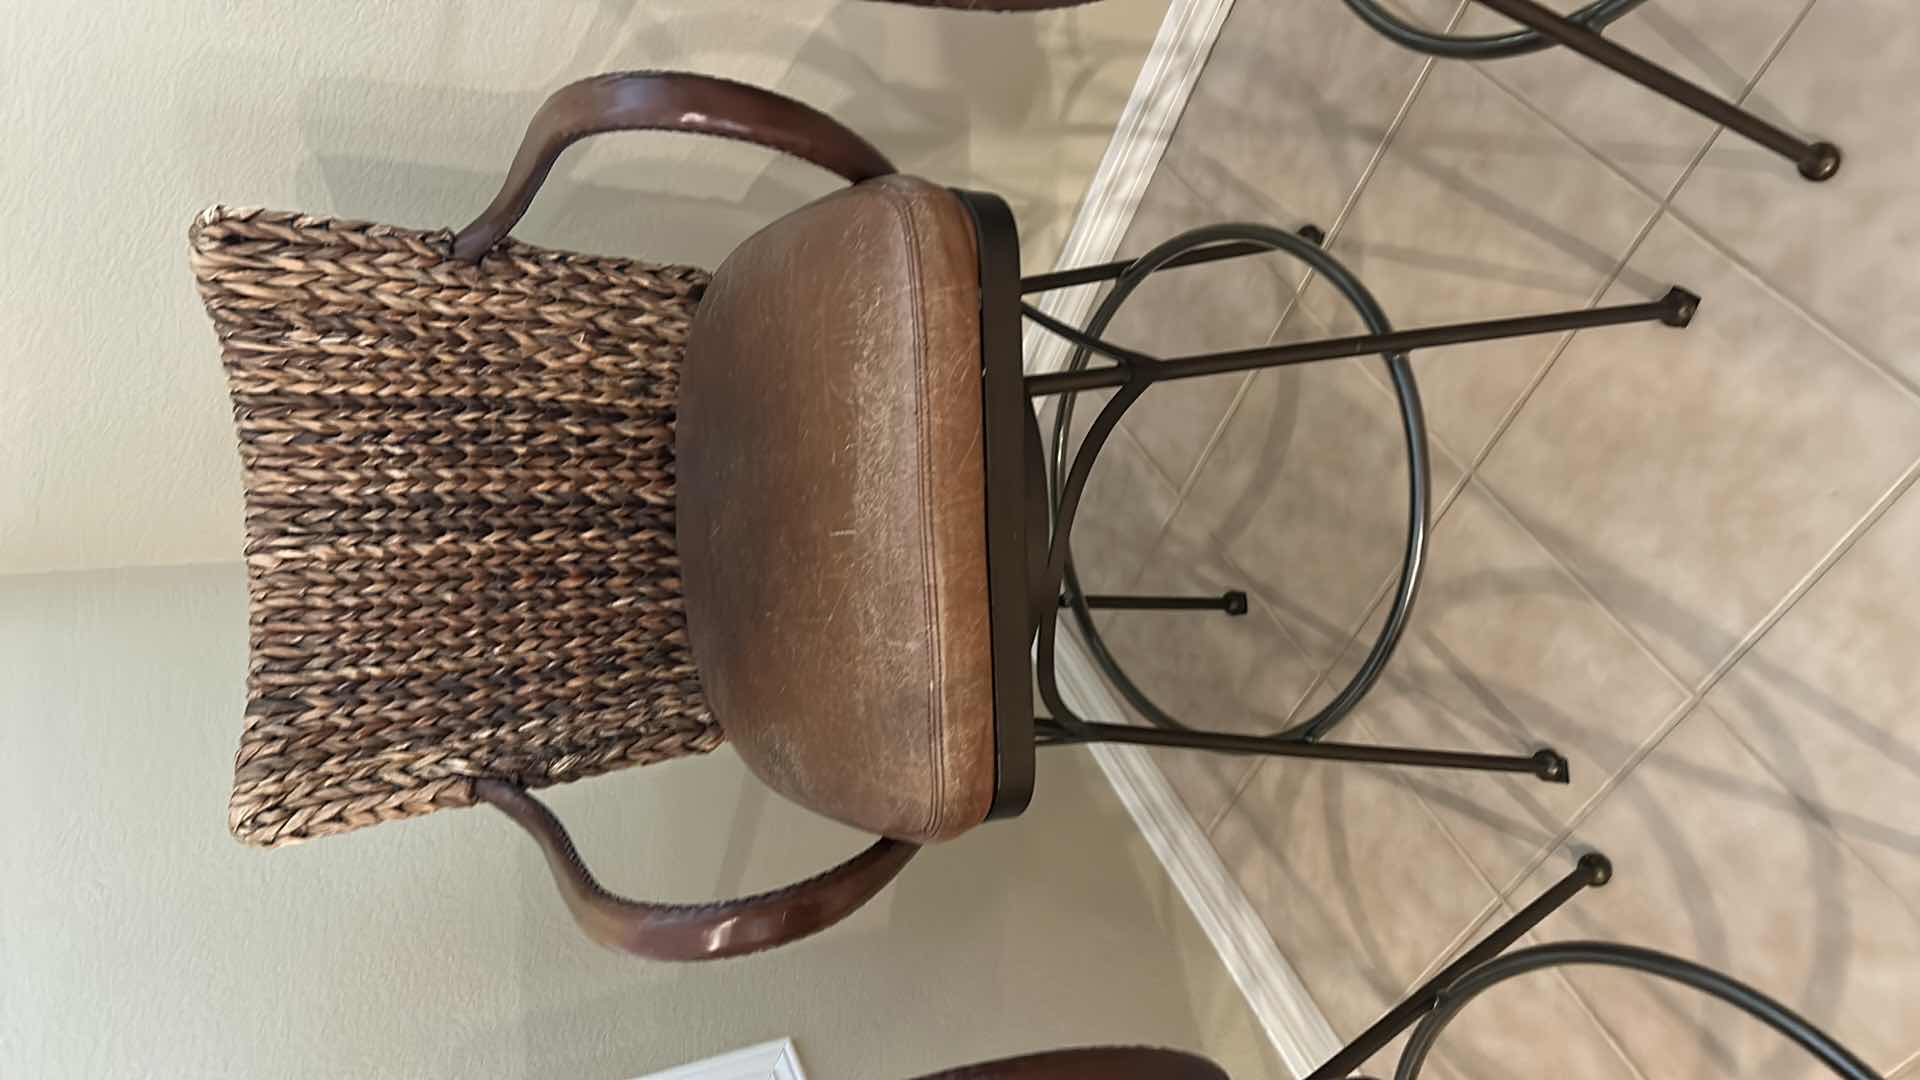 Photo 2 of 3-METAL AND RATTAN WOVEN SWIVEL BAR STOOLS W LEATHER SEATS,
SEAT HEIGHT 30", OVERALL HEIGHT 44"